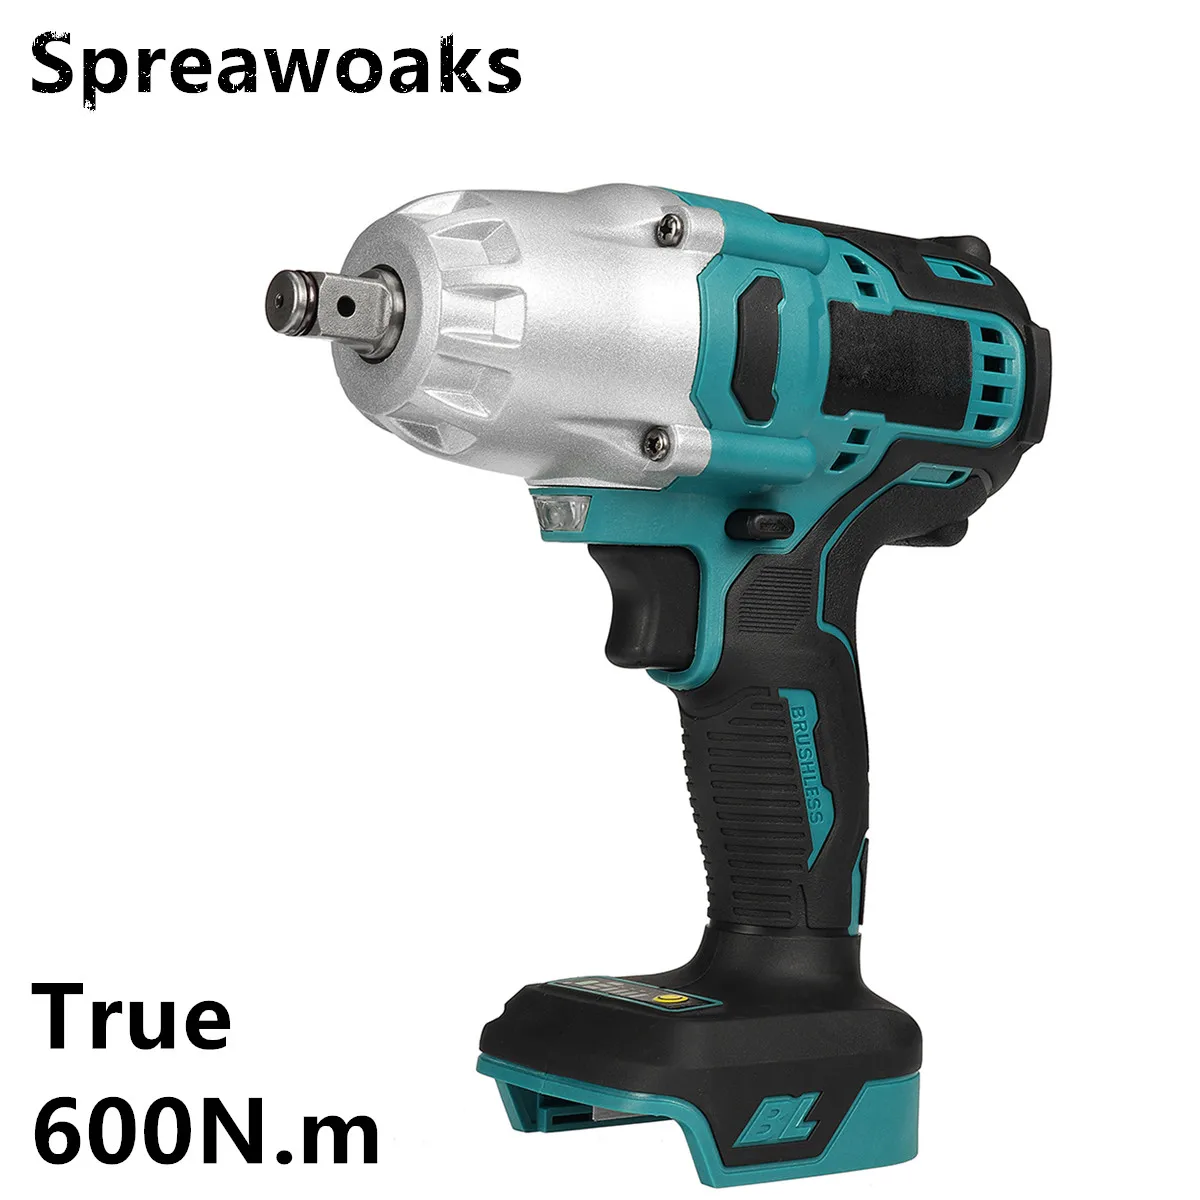 True 600N.m Brushless Cordless 1/2inch Impact Wrench Rechargeable High Torque Car Truck Repair Power Tool For Makita 18V Battery